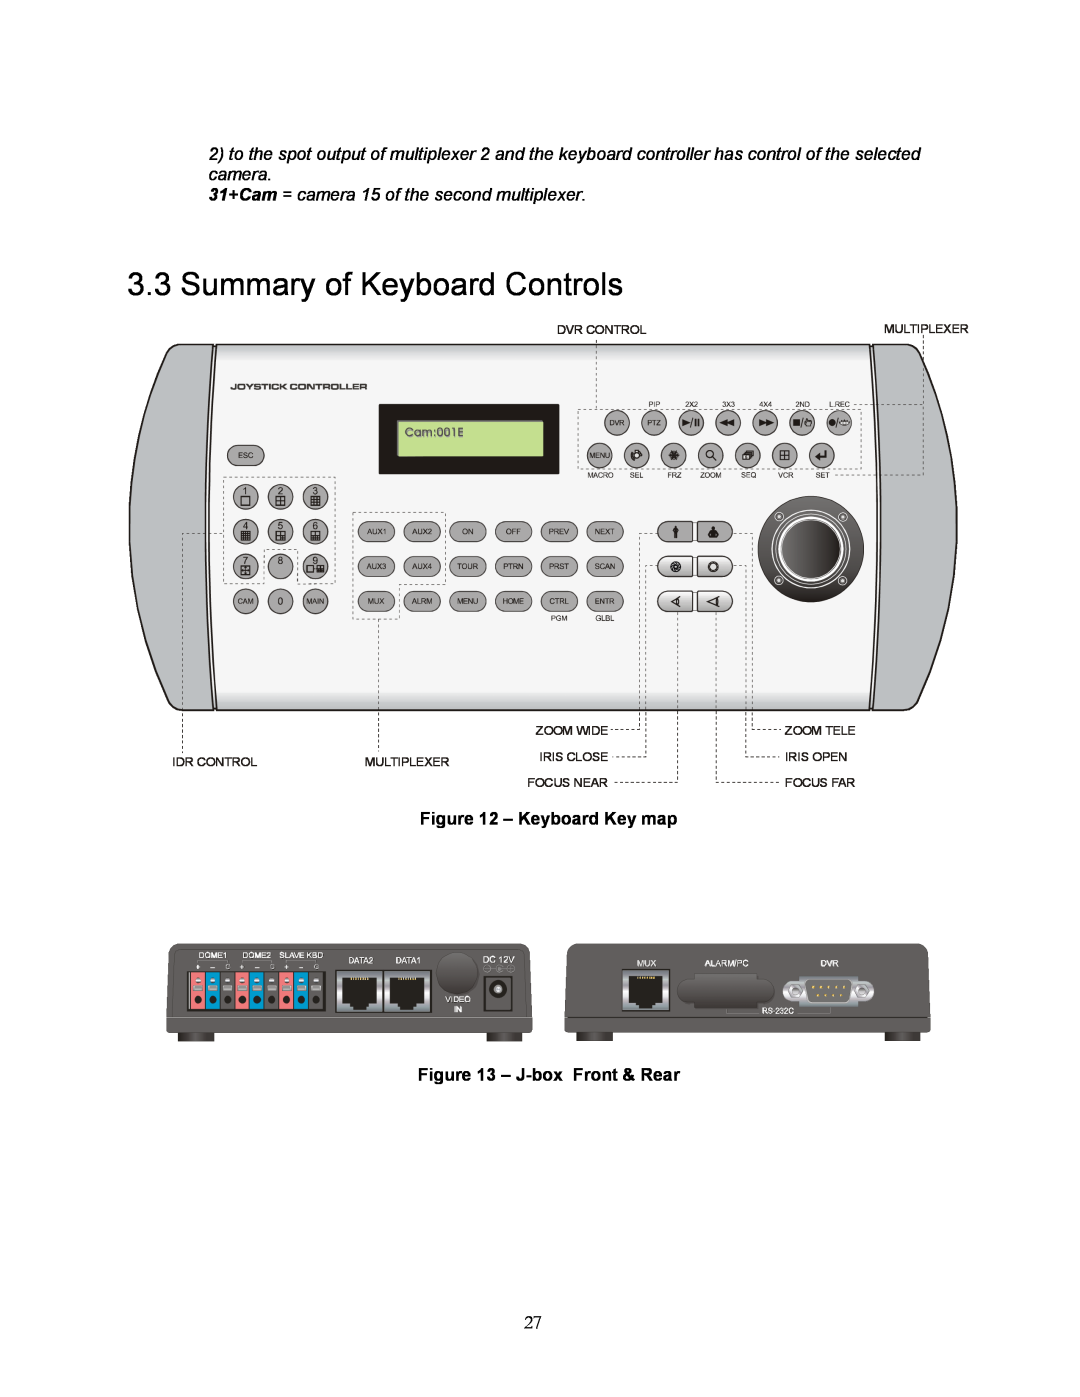 Speco Technologies KBD-927 Summary of Keyboard Controls, Dvr Control, Multiplexer, Cam001E, Zoom Wide, Zoom Tele 